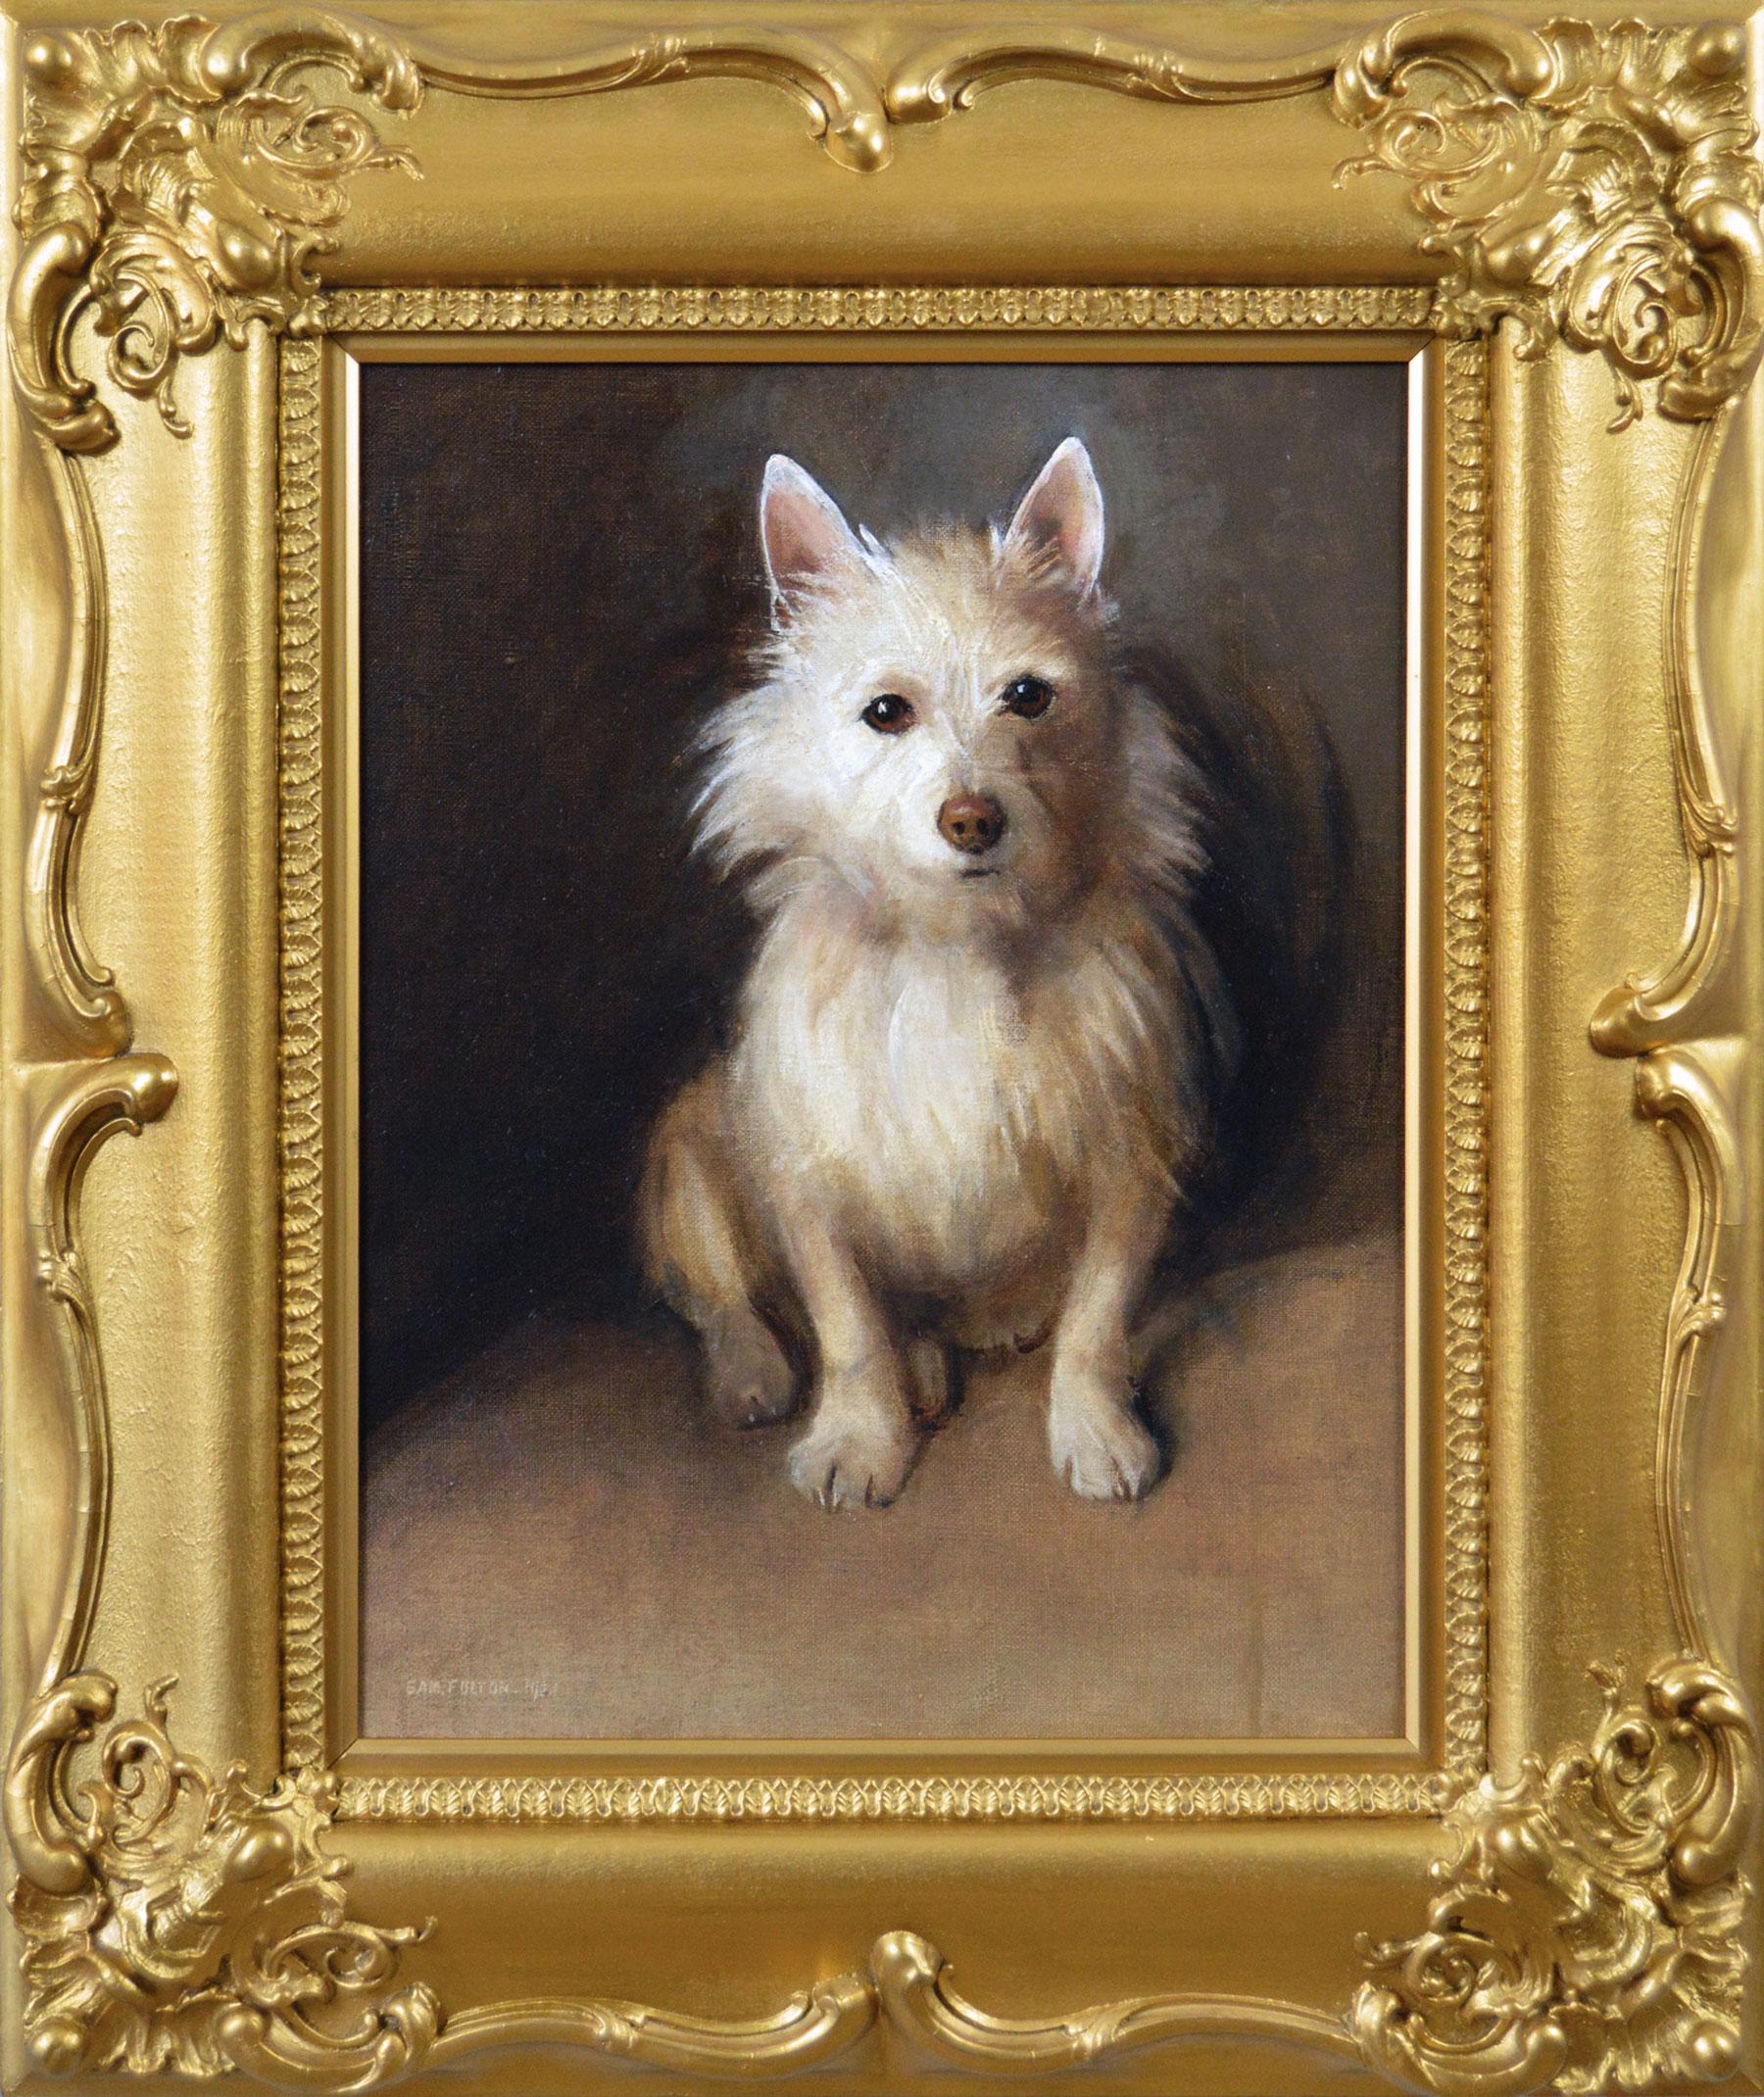 Samuel Fulton Animal Painting - Genre animal oil painting of a West Highland Terrier dog